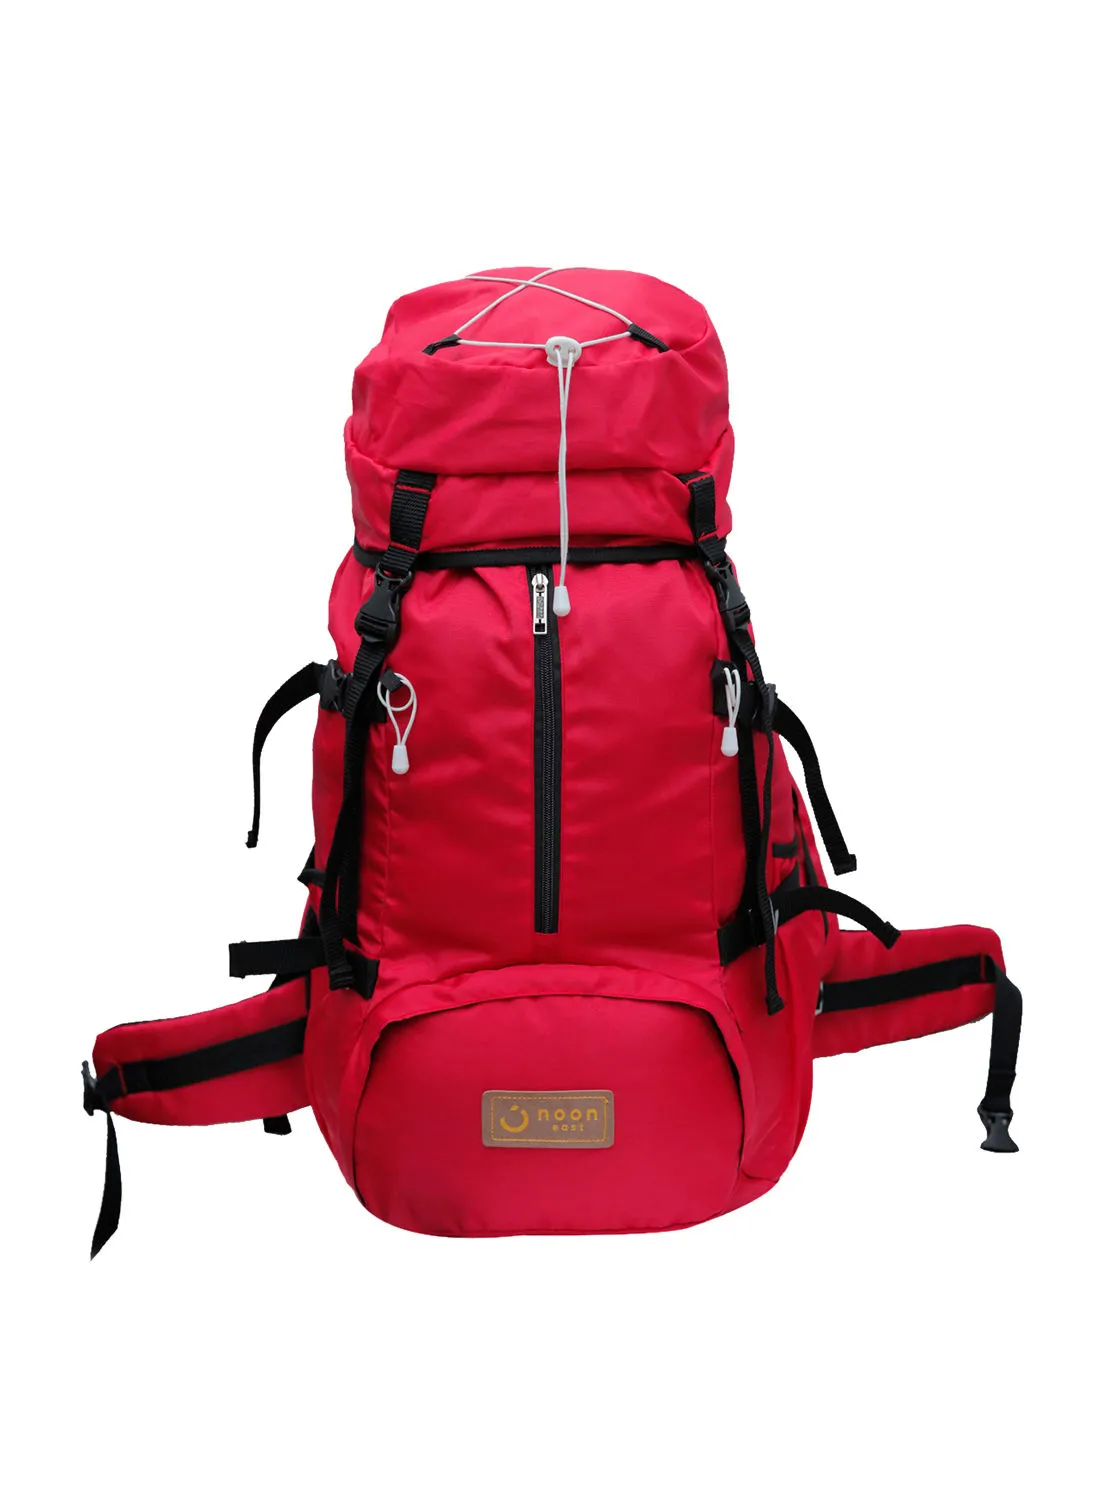 Noon East 45L Drawstring Water Resistant Multi Compartment Unisex Polyester Hiking/Trekking/Camping Backpack Compatible With 13 Inch Laptop Red/Black